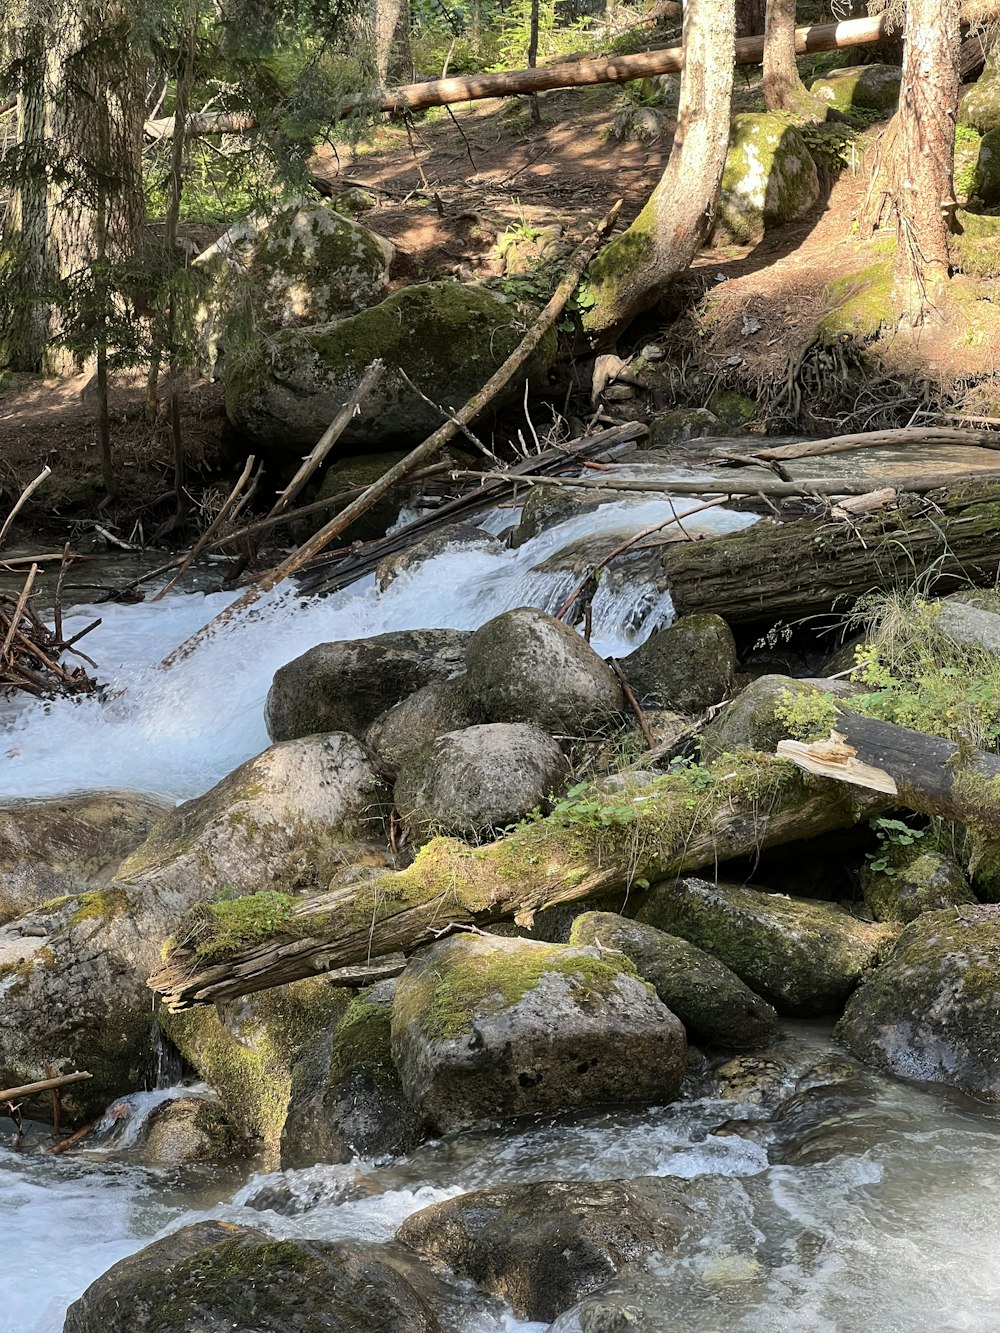 a stream running through a forest filled with rocks